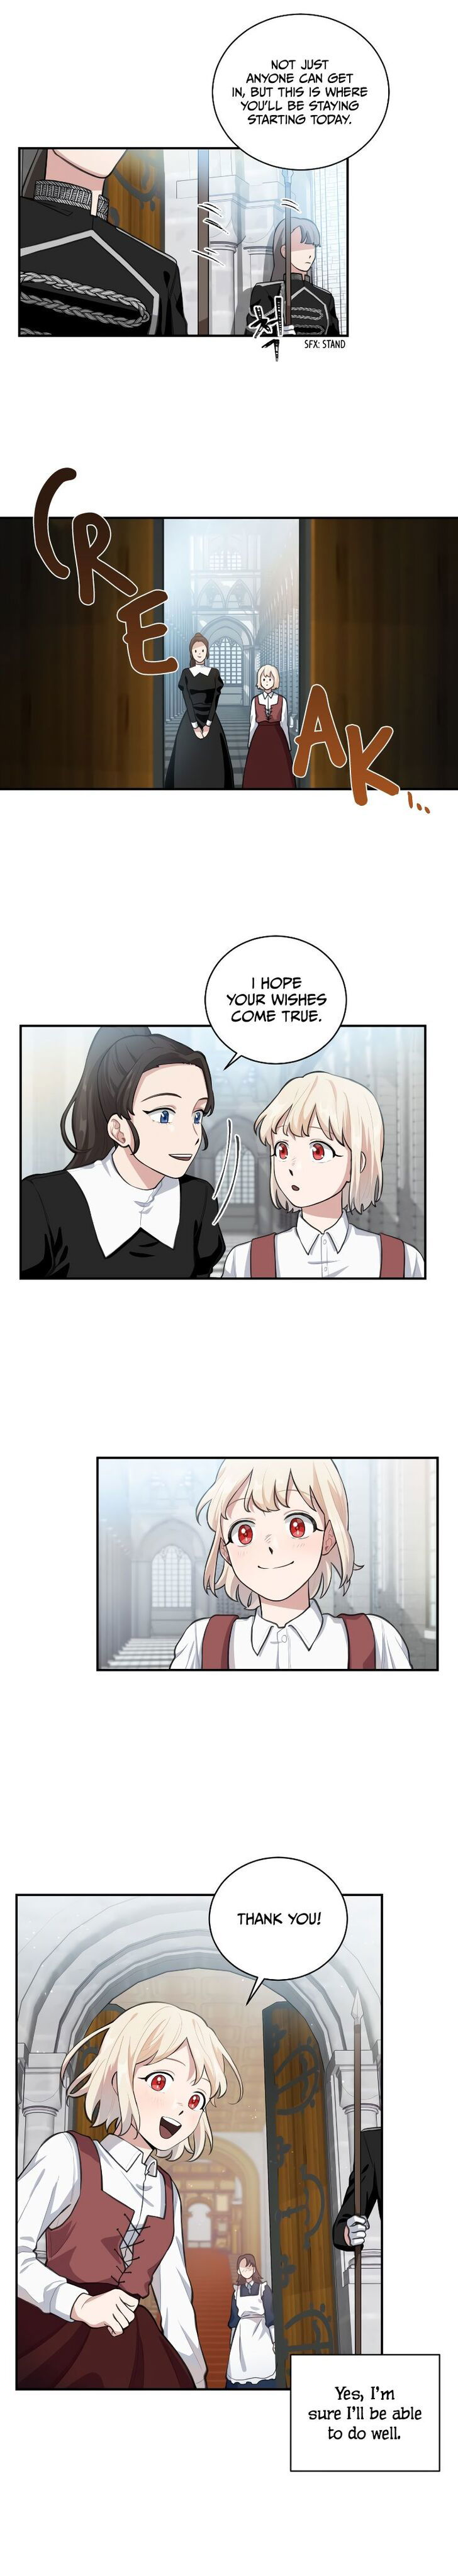 I Became a Maid in a TL Novel Chapter 003 page 5